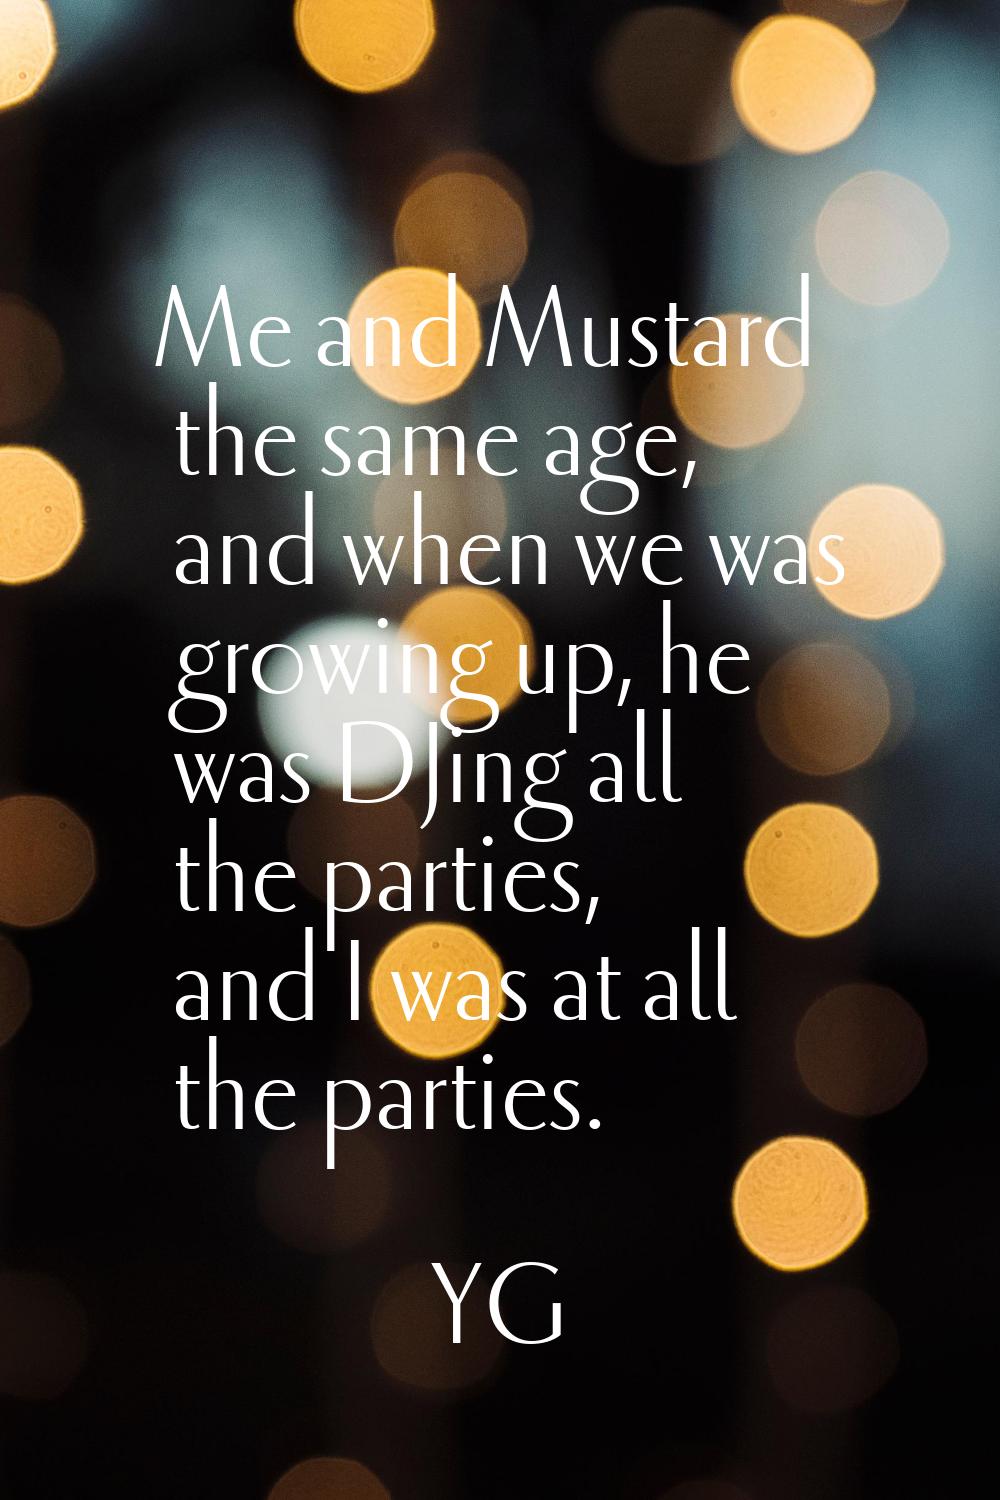 Me and Mustard the same age, and when we was growing up, he was DJing all the parties, and I was at